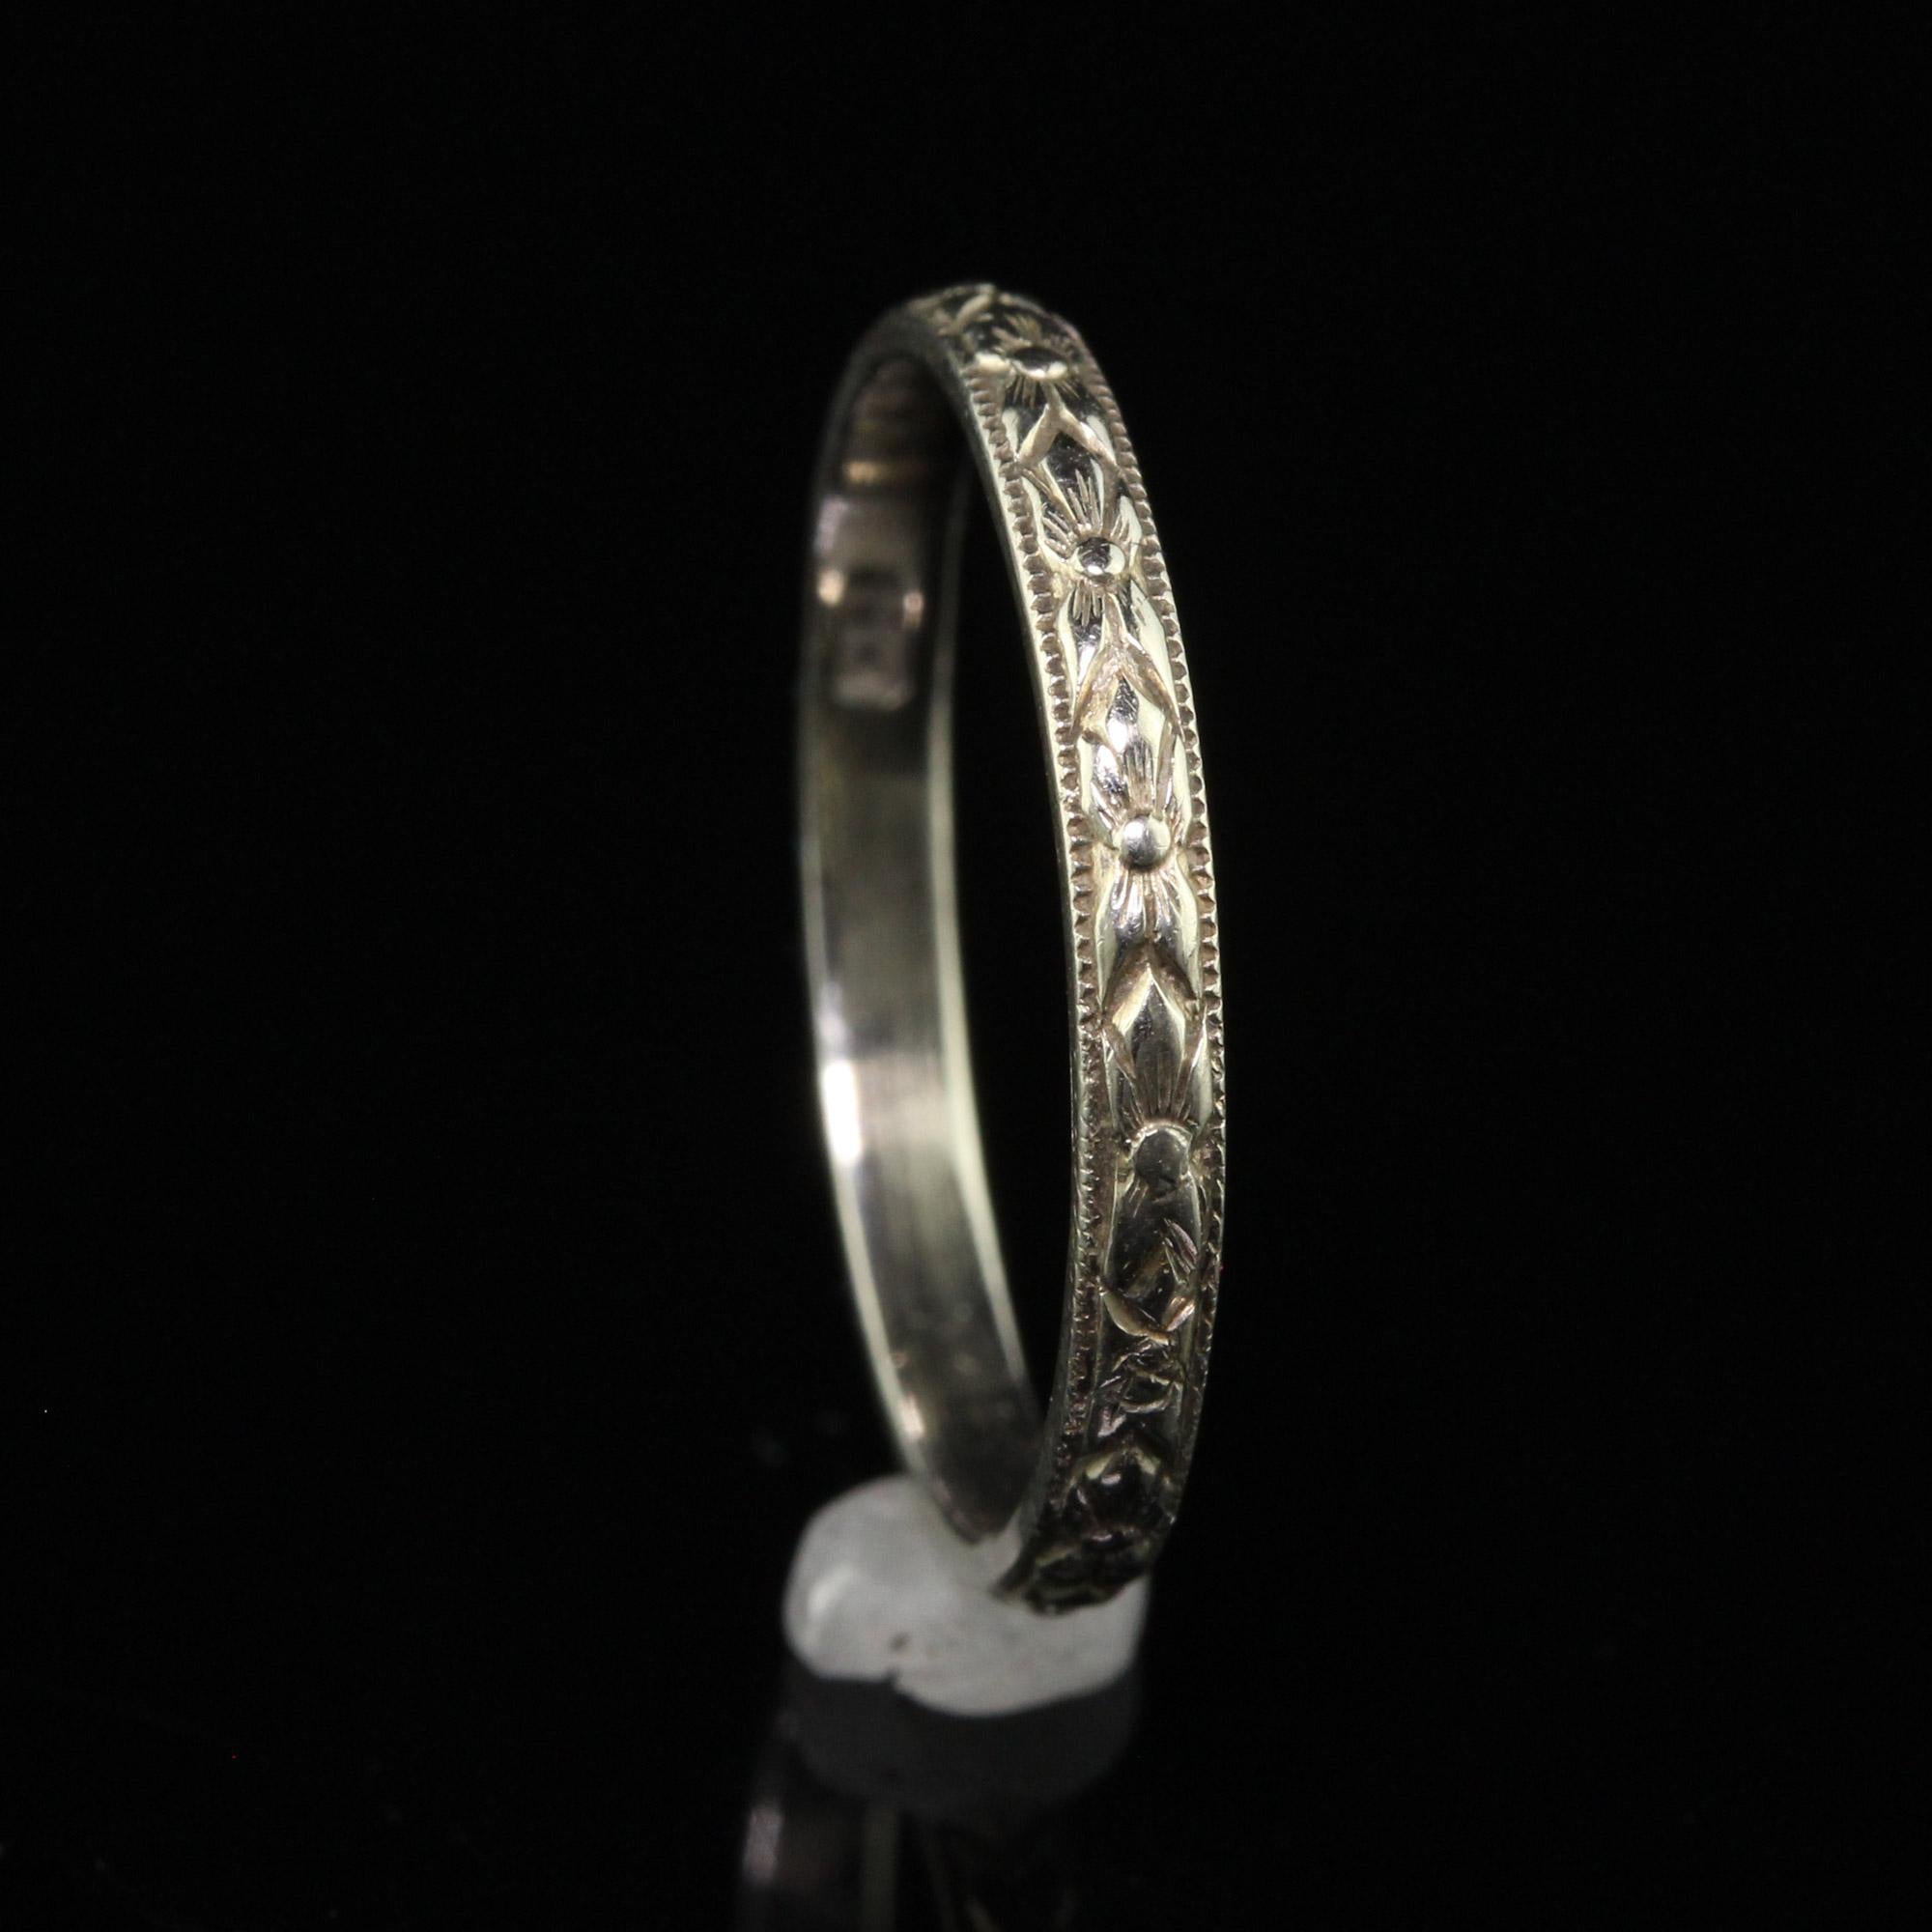 Antique Art Deco 18K White Gold Engraved Wedding Band - Size 5 1/2 For Sale 1